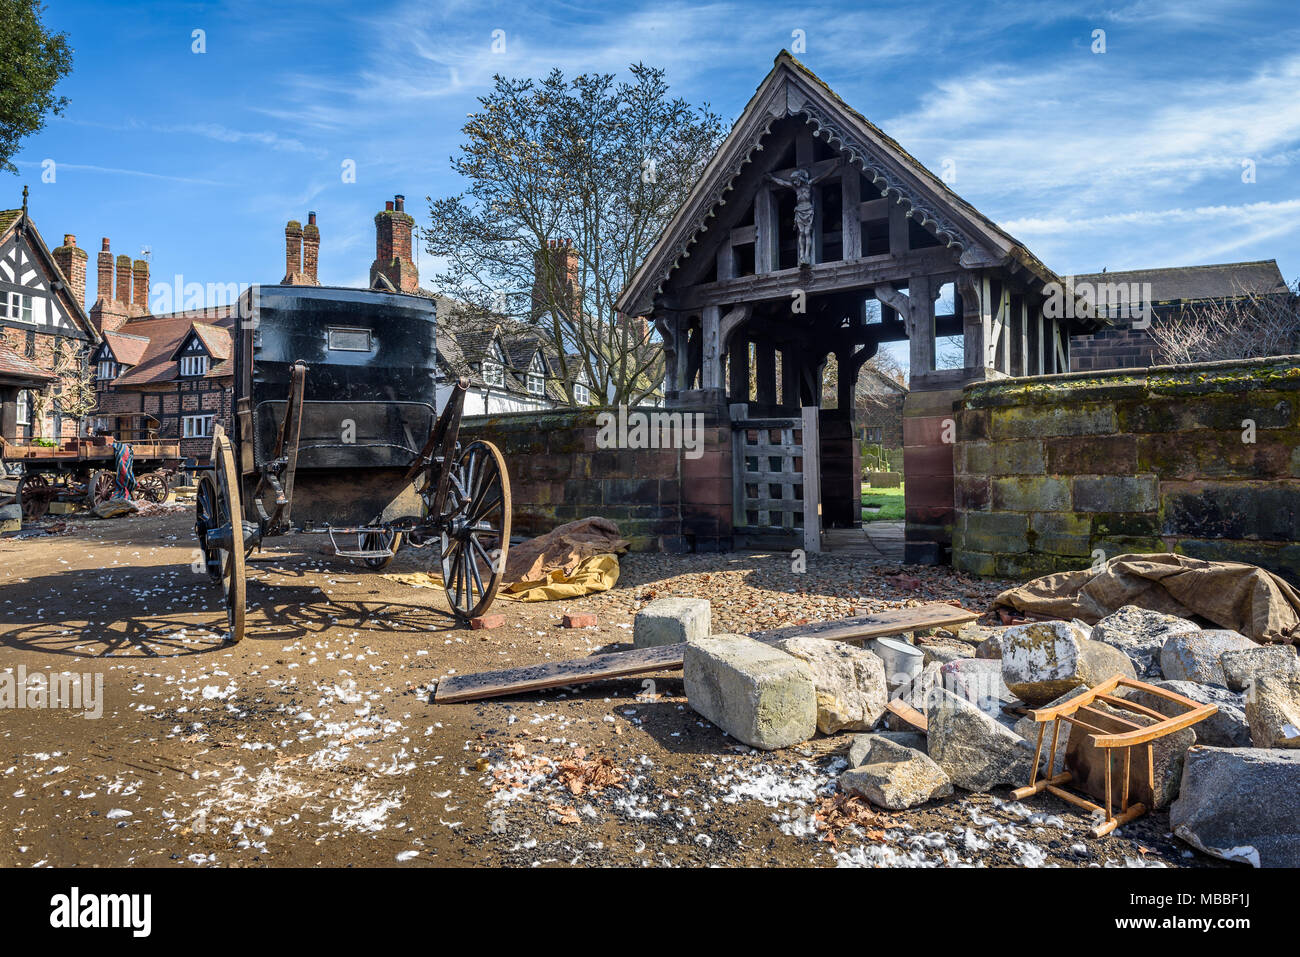 Great Budworth, UK. 9th April, 2018. Props and debris litter alongside Great Budworth Village churchyard, for  the new BBC drama 'War Of The Worlds' by HG Wells,filmed at Great Budworth village, Cheshire on Monday afternoon, April 9th. Stock Photo